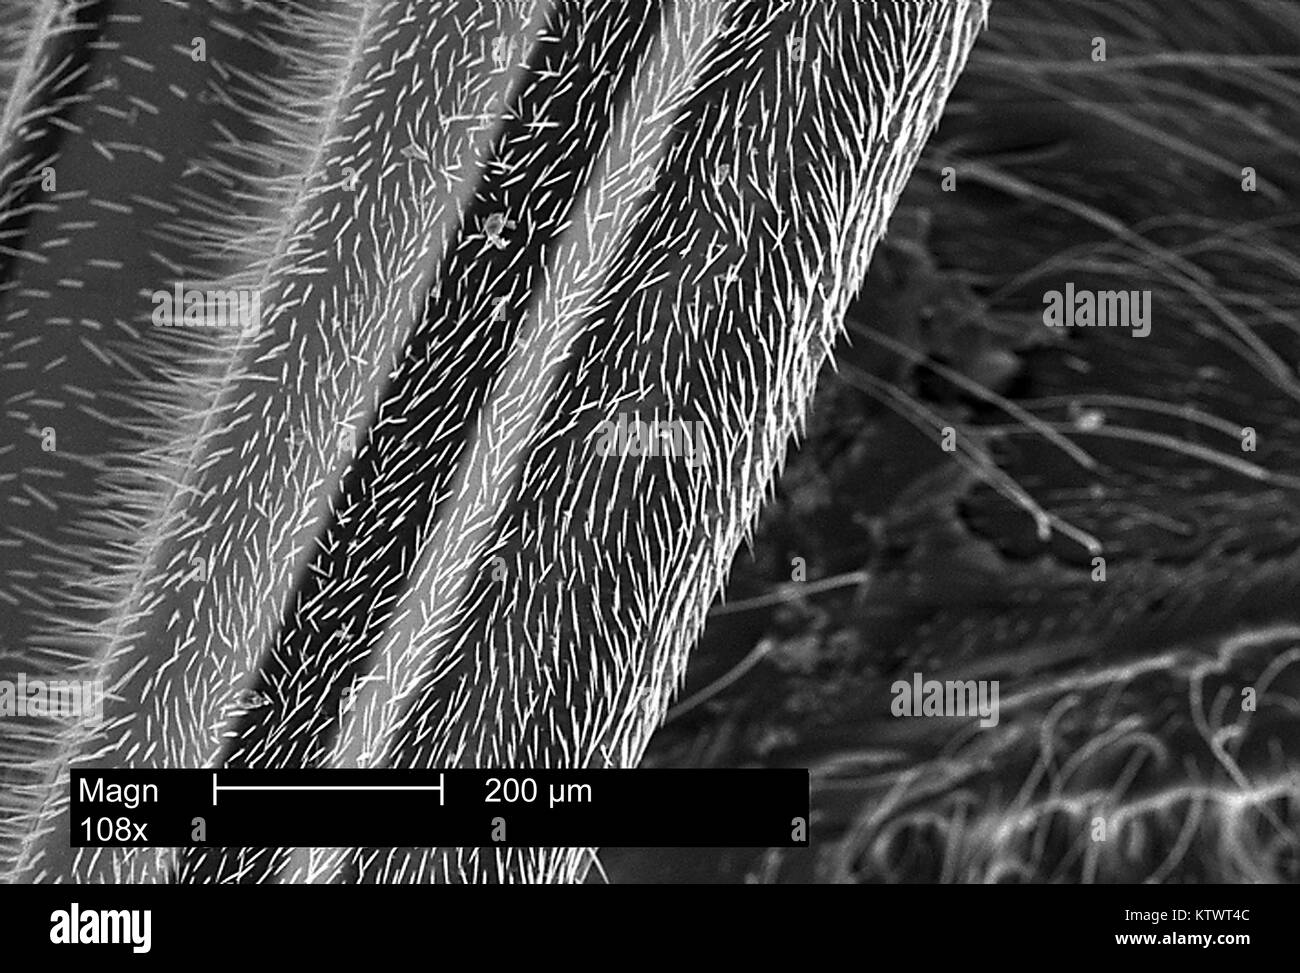 This is a scanning electron micrograph (SEM) of a wasp's leg appendage revealing small, highly sensitive hairs on its surface magnified 108X. Known as setae, these hairs act to increase the levels of sensitivity experienced by the wasp to environmental conditions such as wind direction, moisture, and temperature. Image courtesy CDC, 2002. Stock Photo